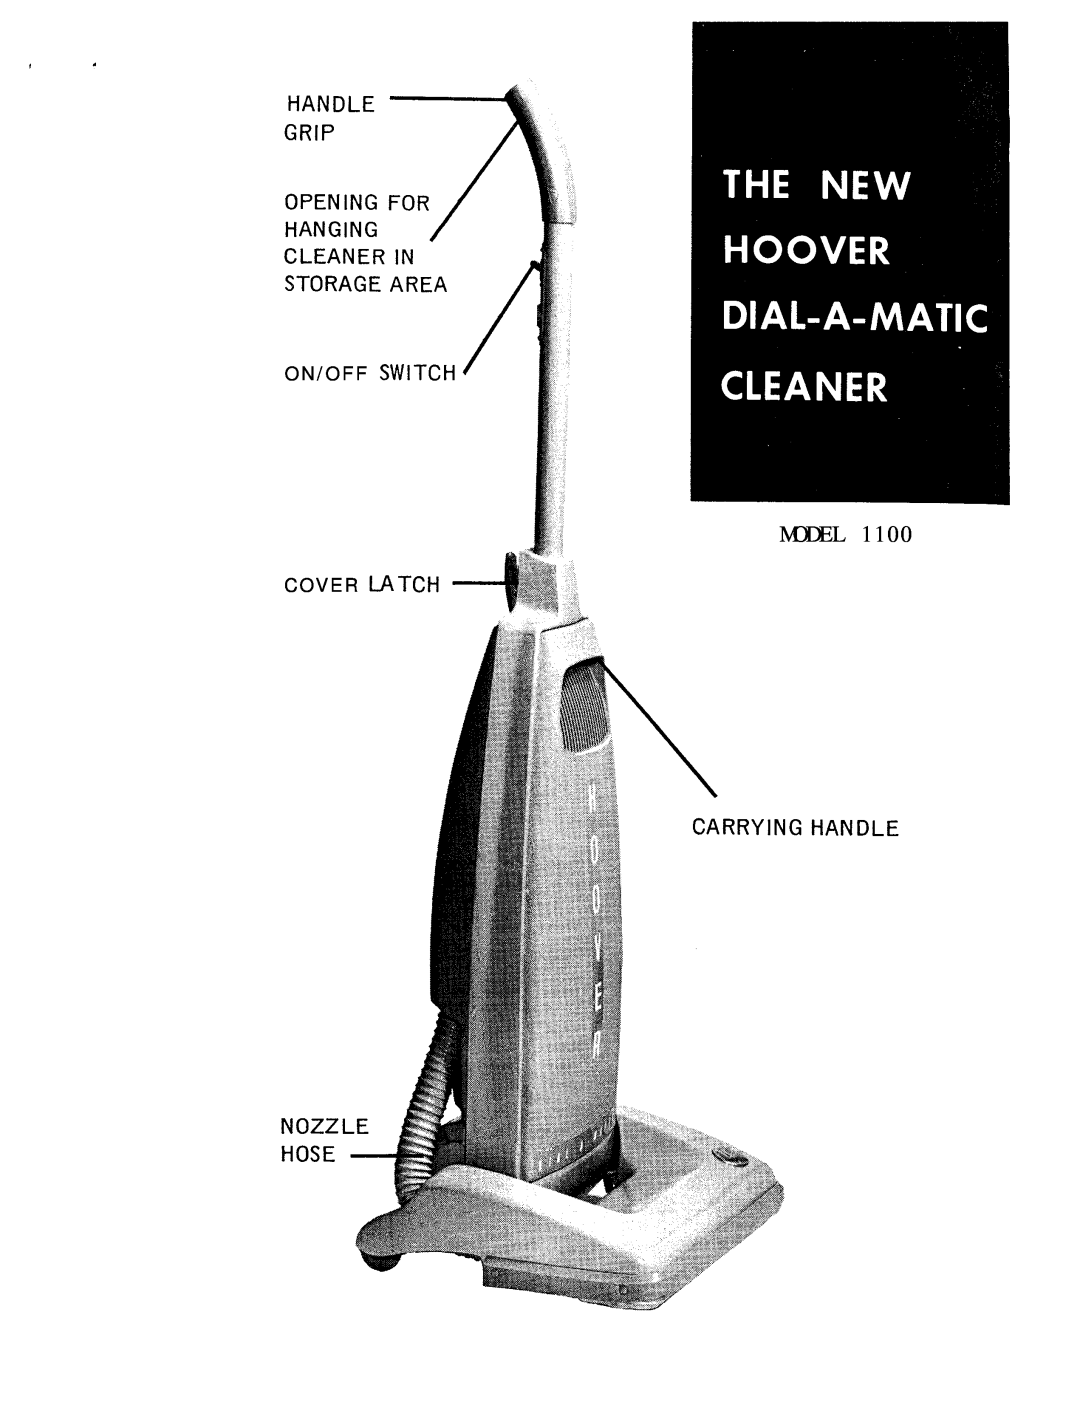 Hoover 1100 Model, Handle Grip Opening For Hanging Cleaner In Storage Area, O N / O F F Switch, C O V E R Latch G Handle 